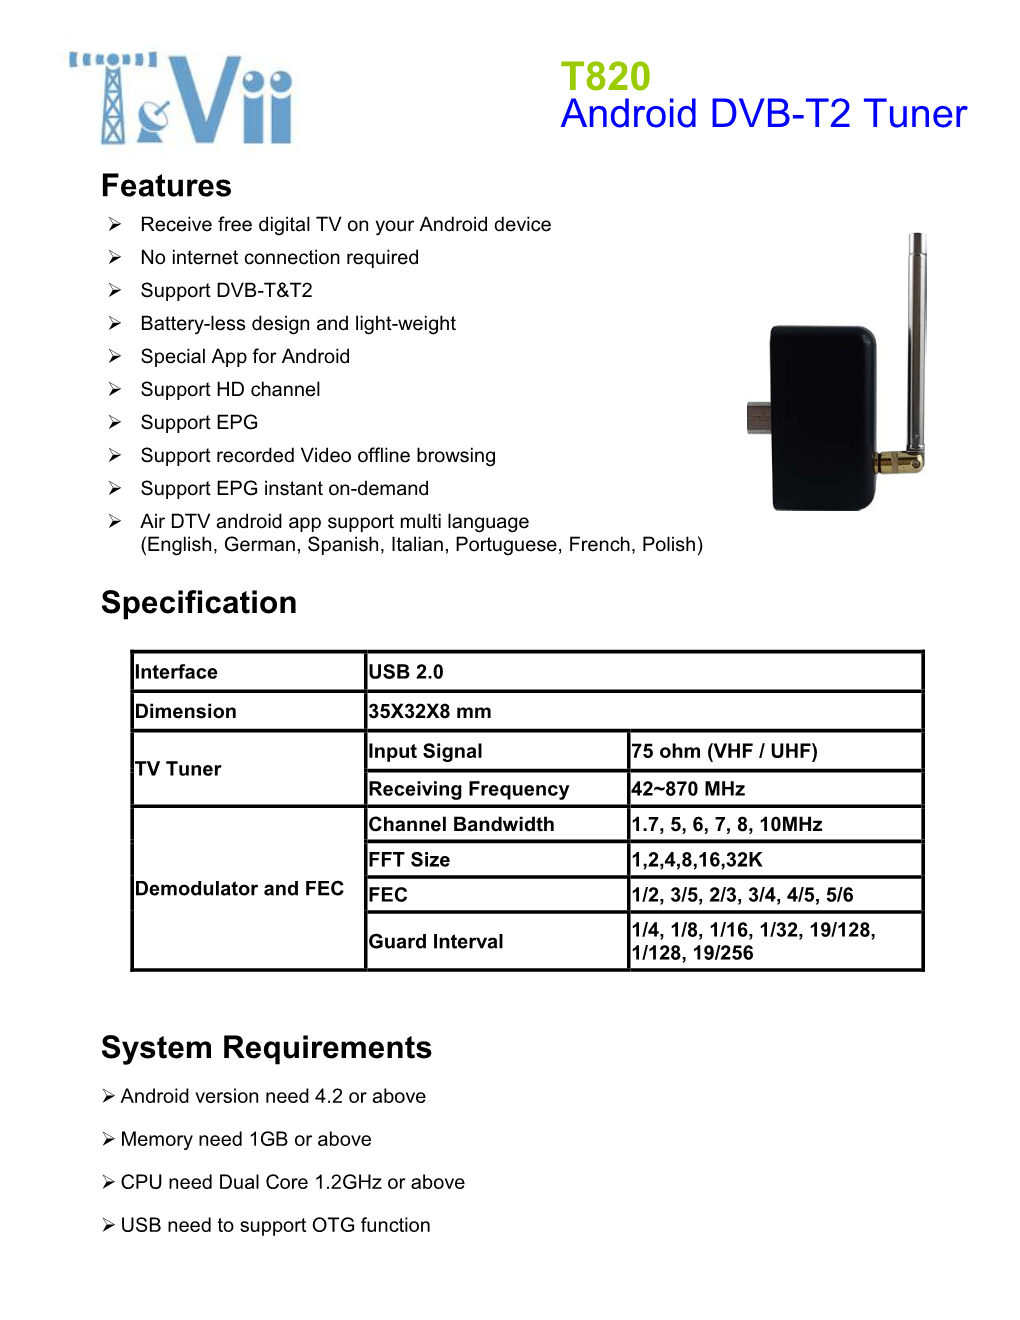 T820 Android DVB-T2 Tuner